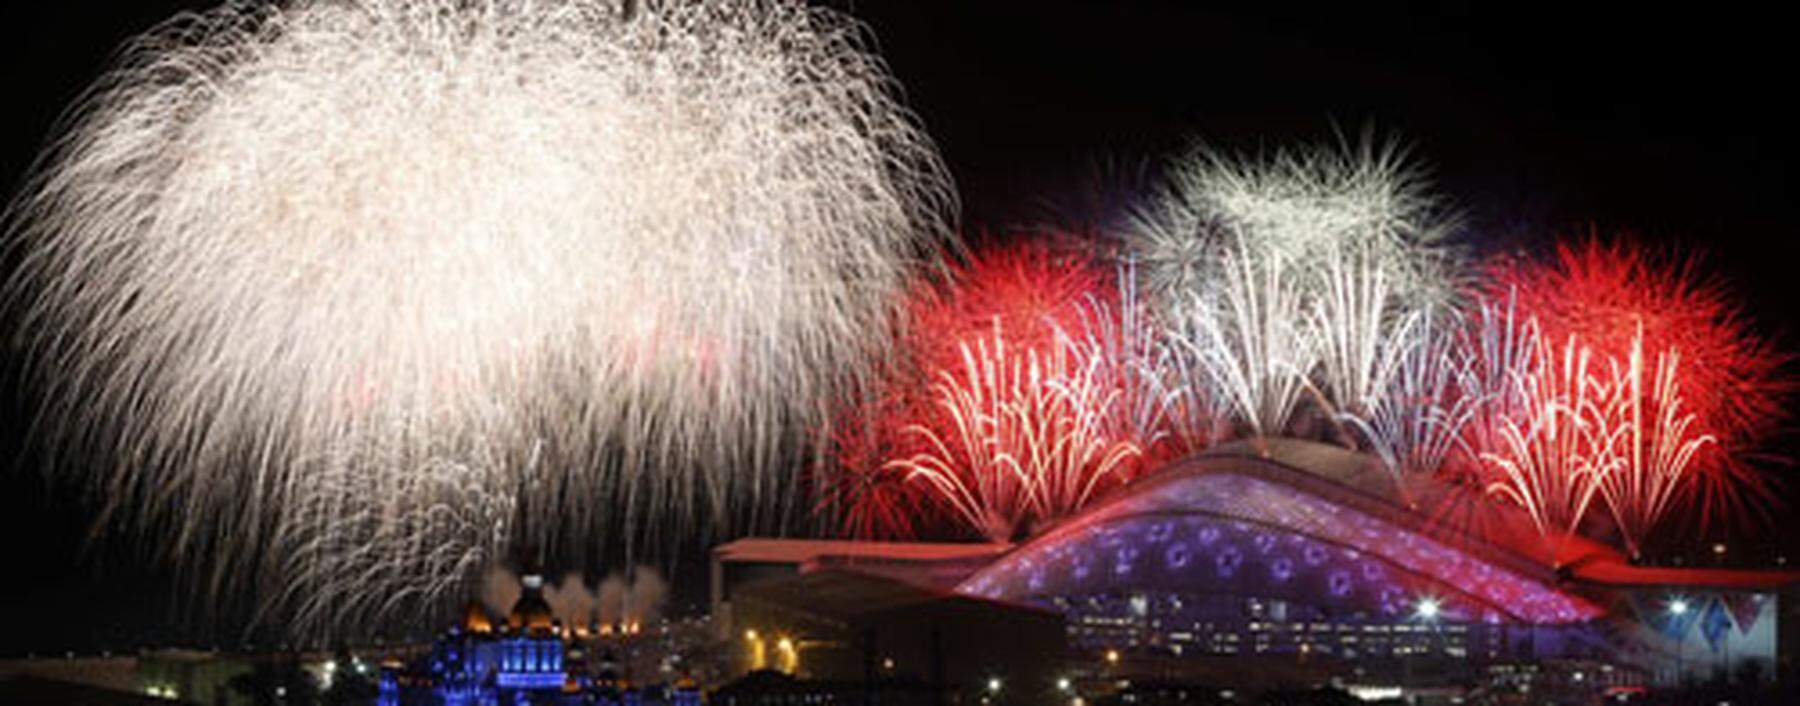 Fireworks are seen over the Olympic Park during the opening ceremony at the Adler district of Sochi